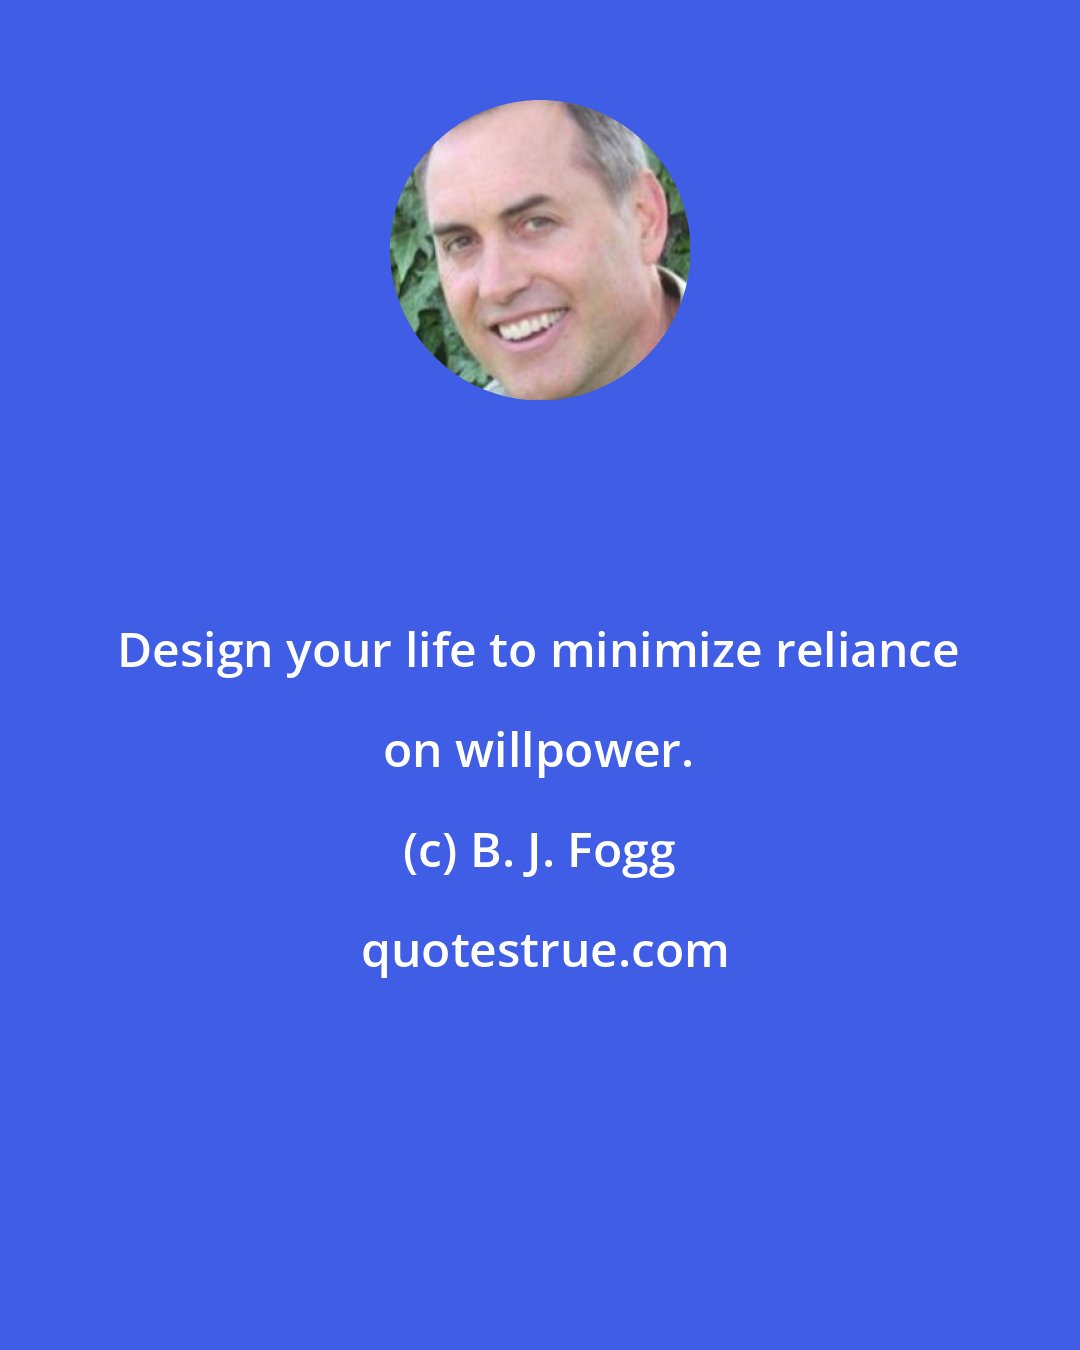 B. J. Fogg: Design your life to minimize reliance on willpower.